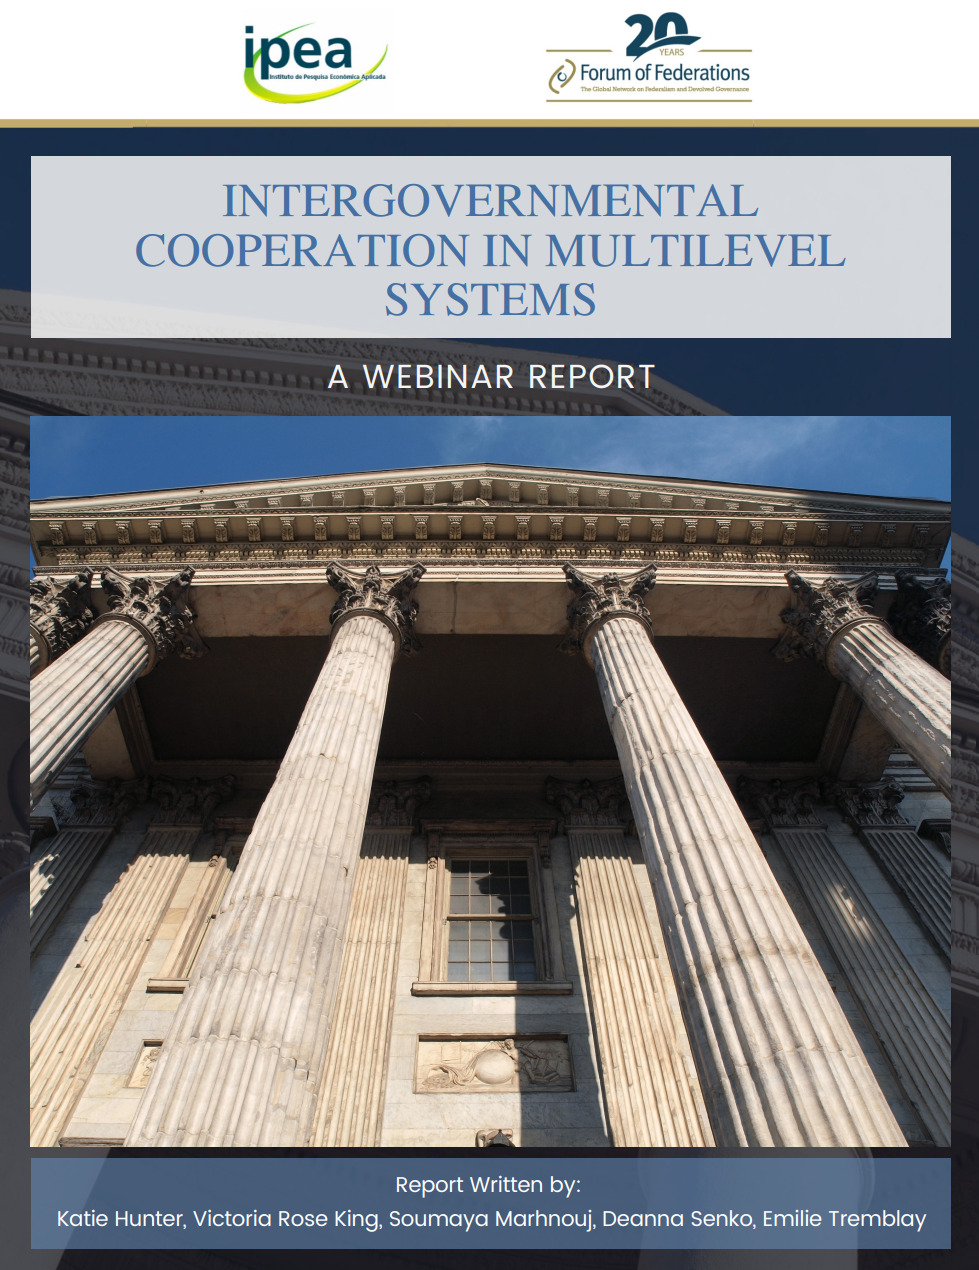 Intergovernmental Cooperation in Multilevel Systems